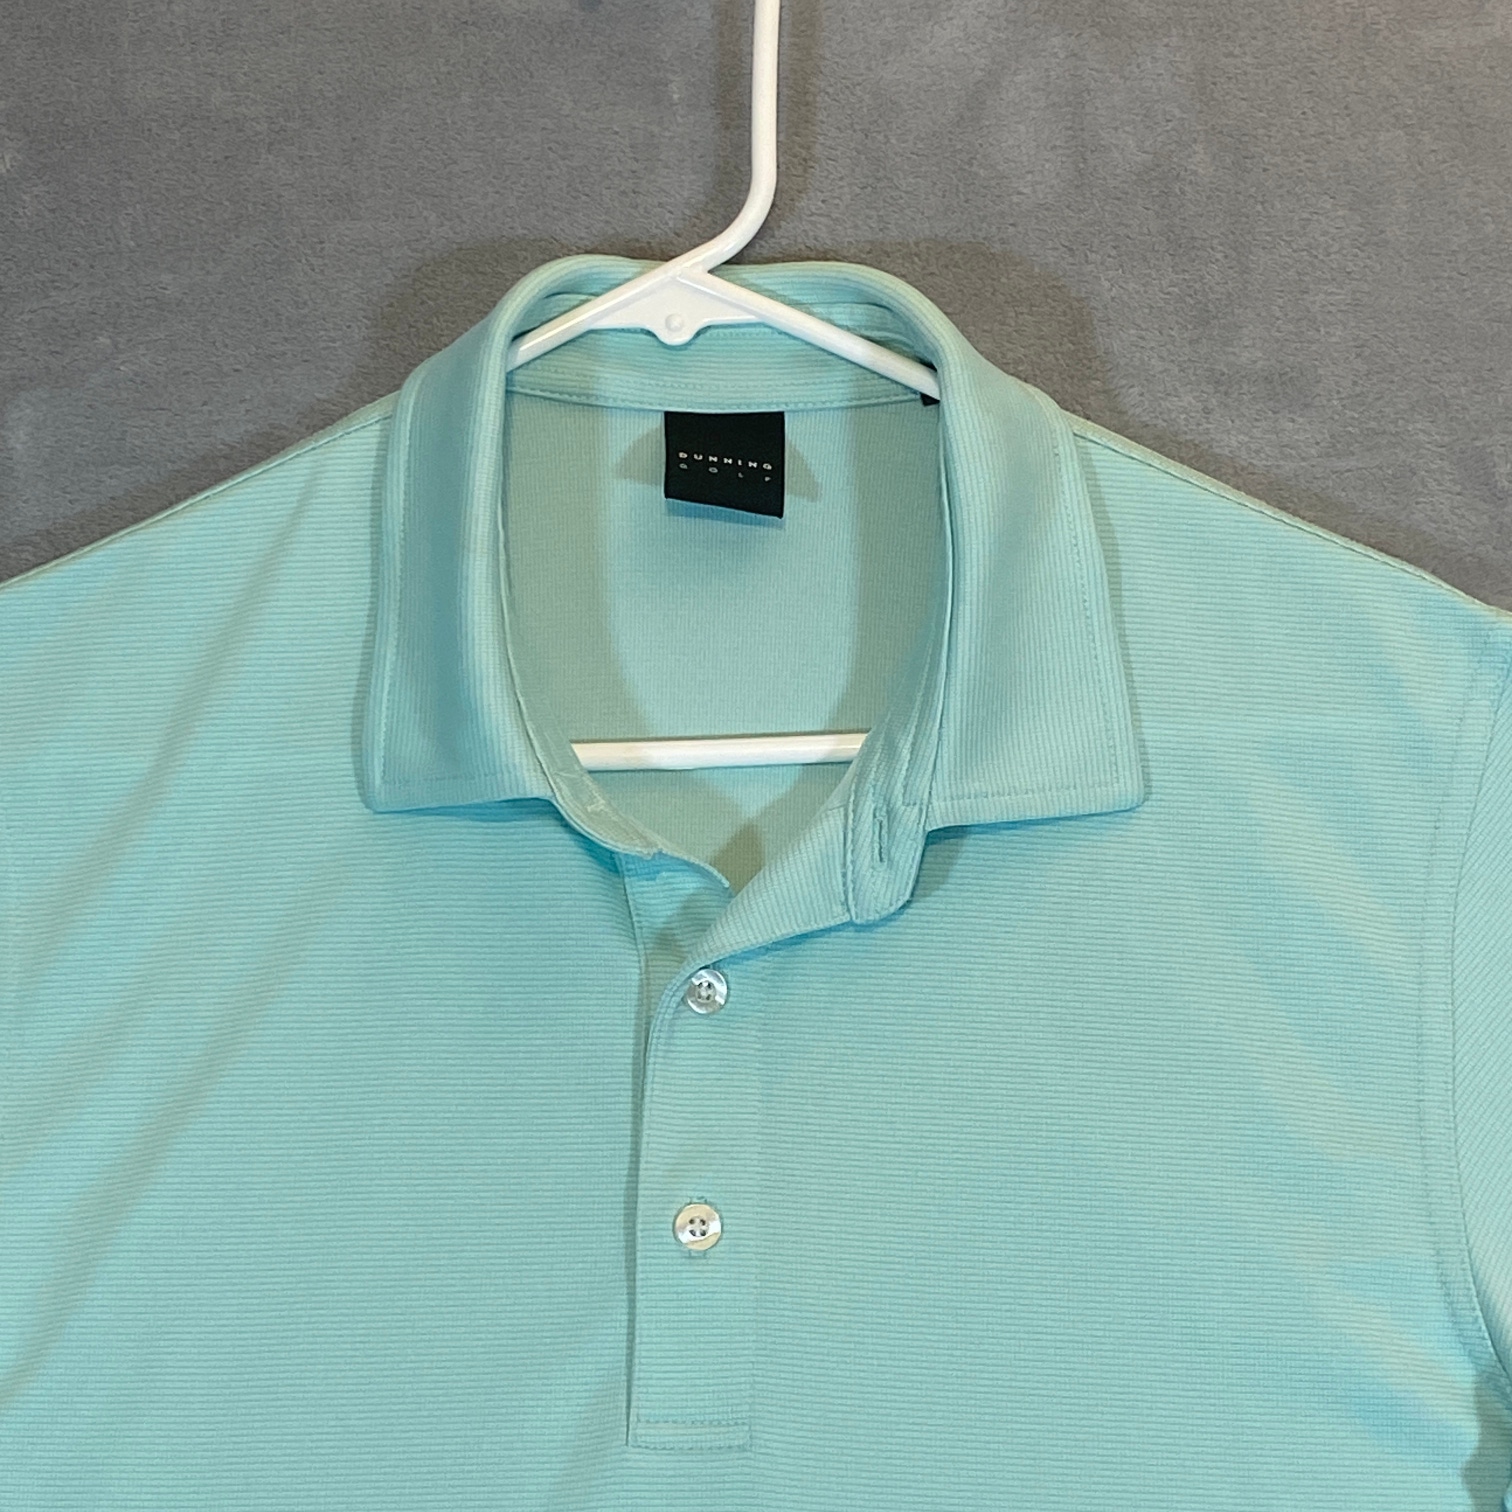 Dunning Golf Polo Shirt Mens Size Small Cool Mint Short Sleeve Arm Logo Casual